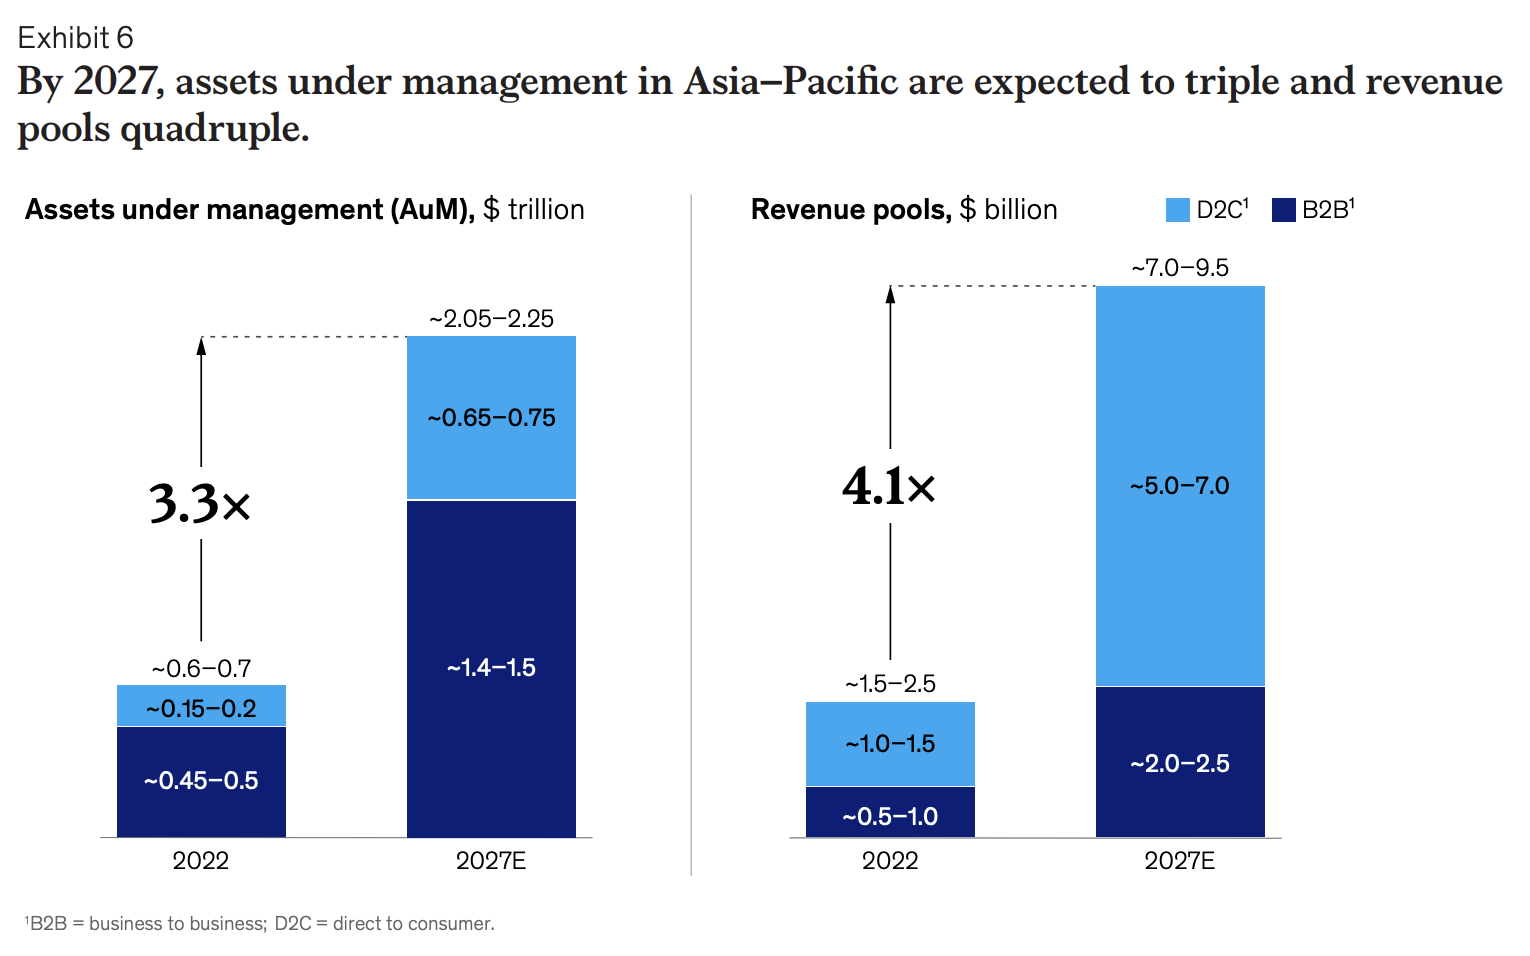 APAC wealthtech assets under management and revenue pools, Source: WealthTech in Asia-Pacific: The next frontier in financial innovation, McKinsey, Oct 2023